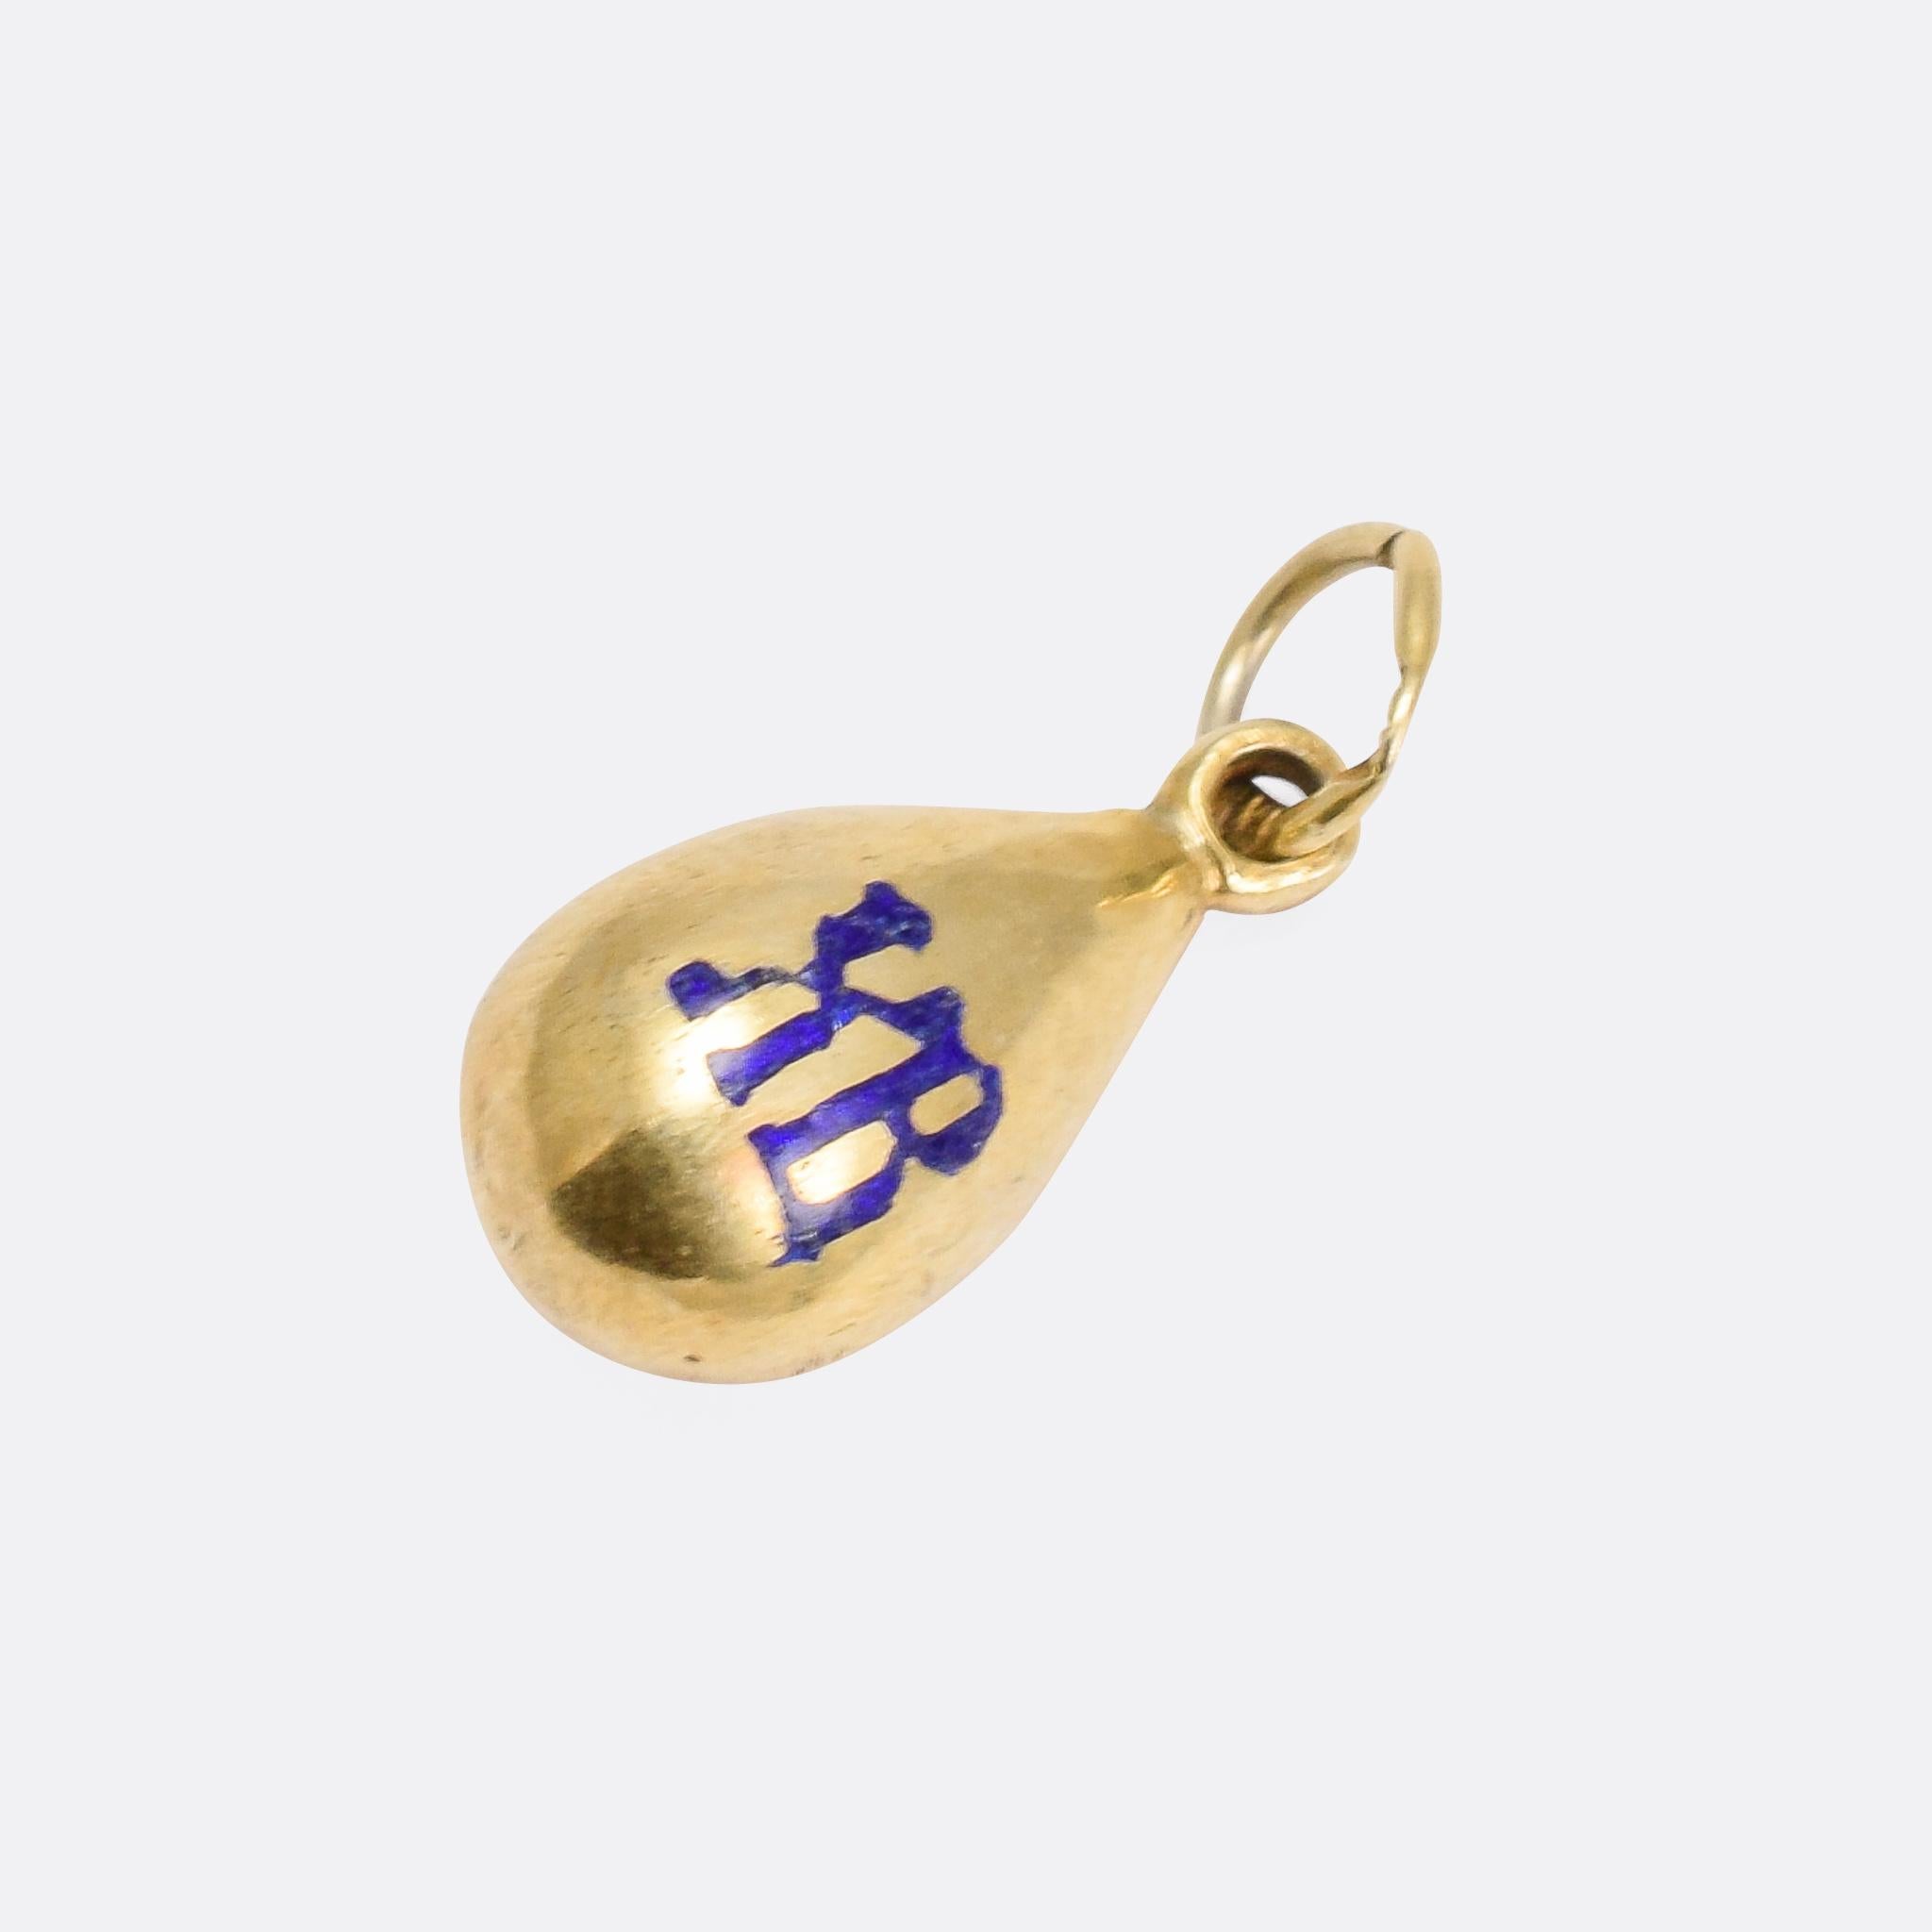 A fine antique miniature egg pendant modelled in silver gilt with blue enamelled lettering. The XB motif stands for Christos Anesti, or Christ is Risen. 

MEASUREMENTS 
16.1 x 8.5mm

WEIGHT 
1.8g

MARKS 
Stamped 84 (Russian silver)